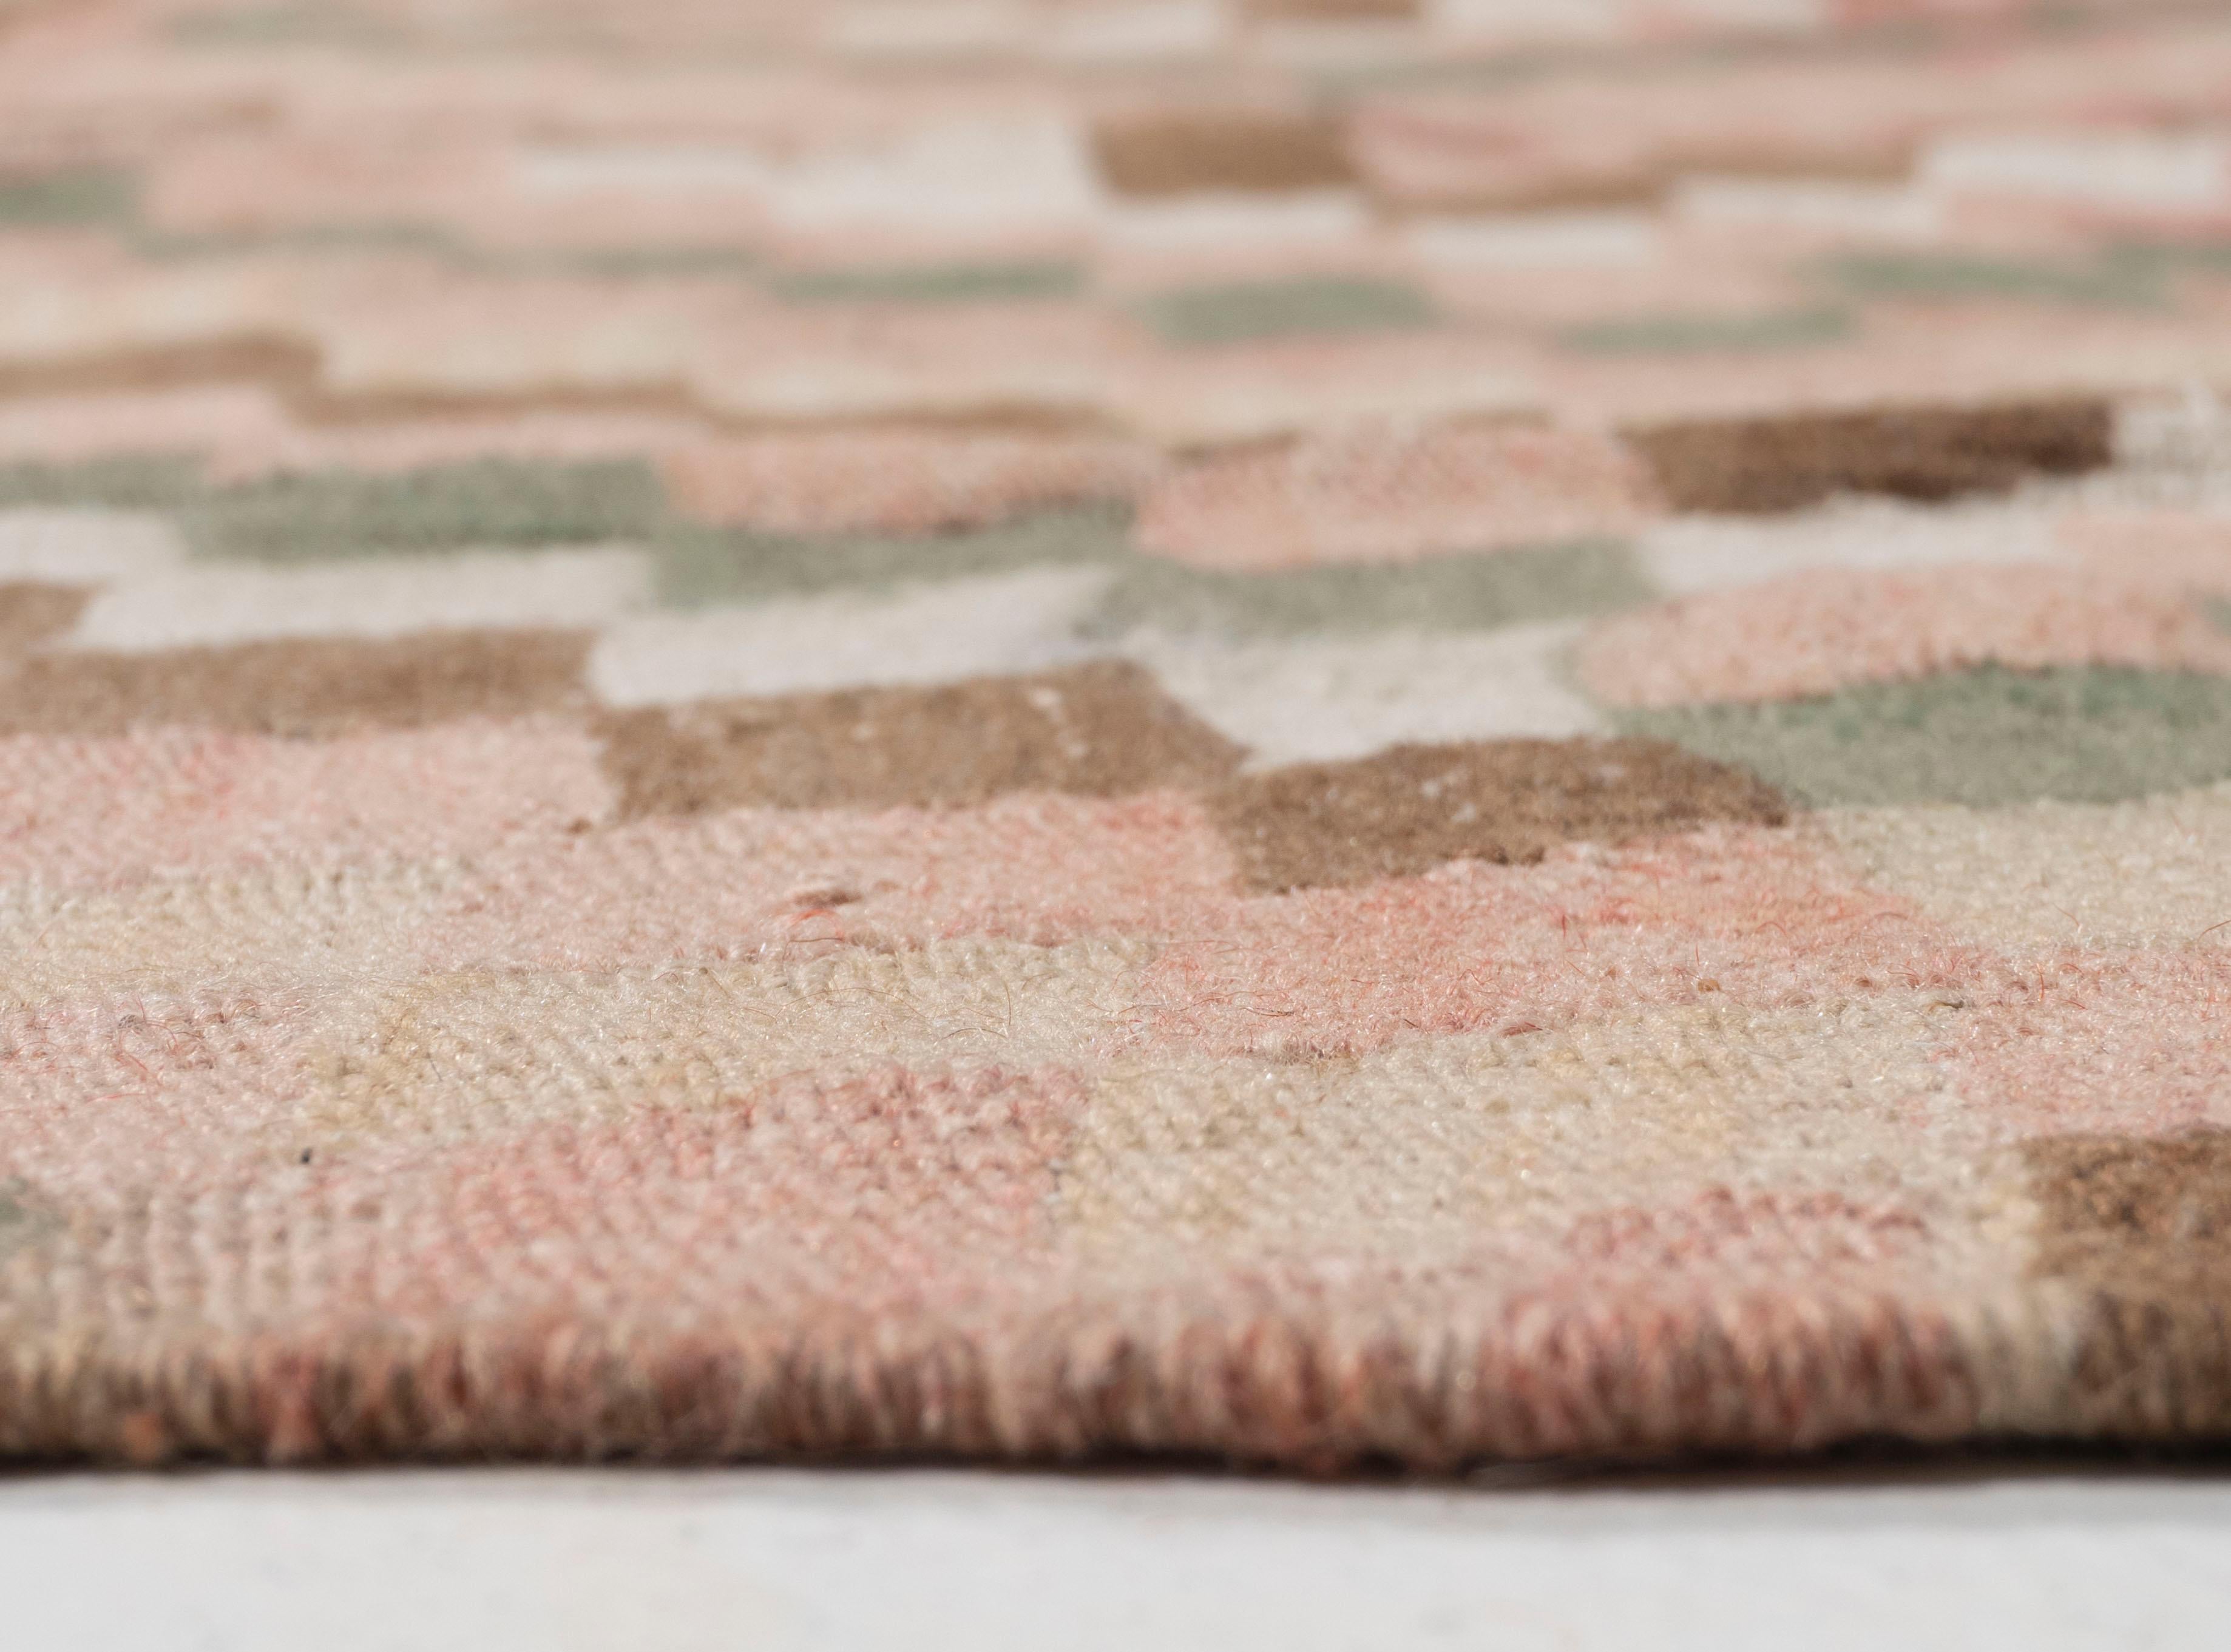 Vintage Turkish Kilim 5'5 X 9'2. This vintage Turkish flat weave Kilim is hand-woven. The simplicity and boldness of this piece can also give a contemporary feel and is able to look at home in both a modern and traditional setting. The geometric